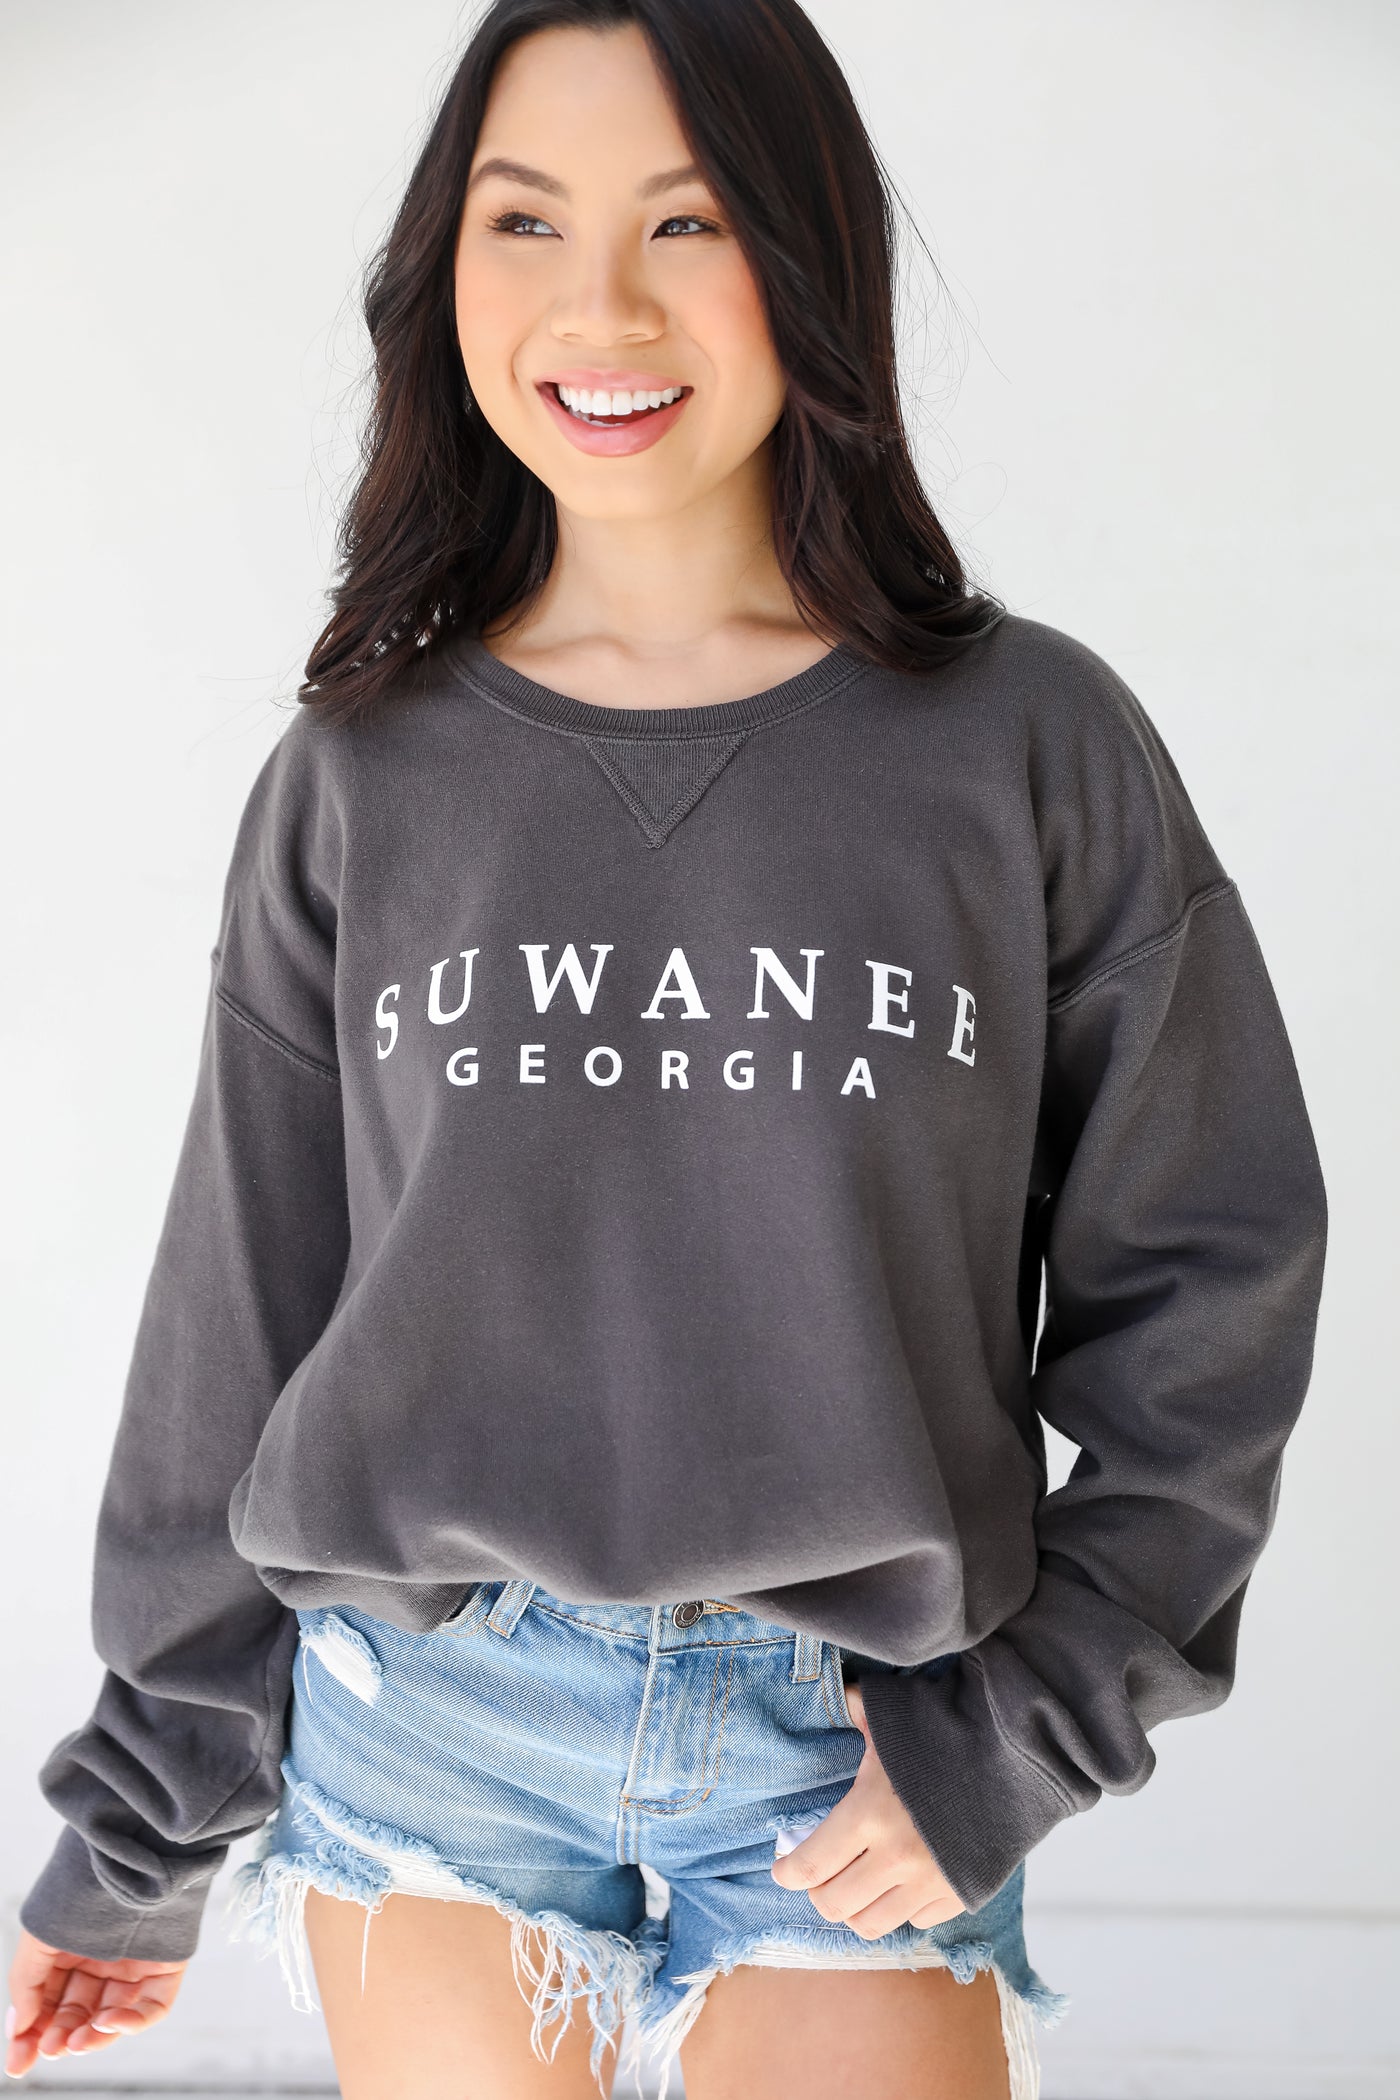 Charcoal Suwanee Georgia Pullover front view